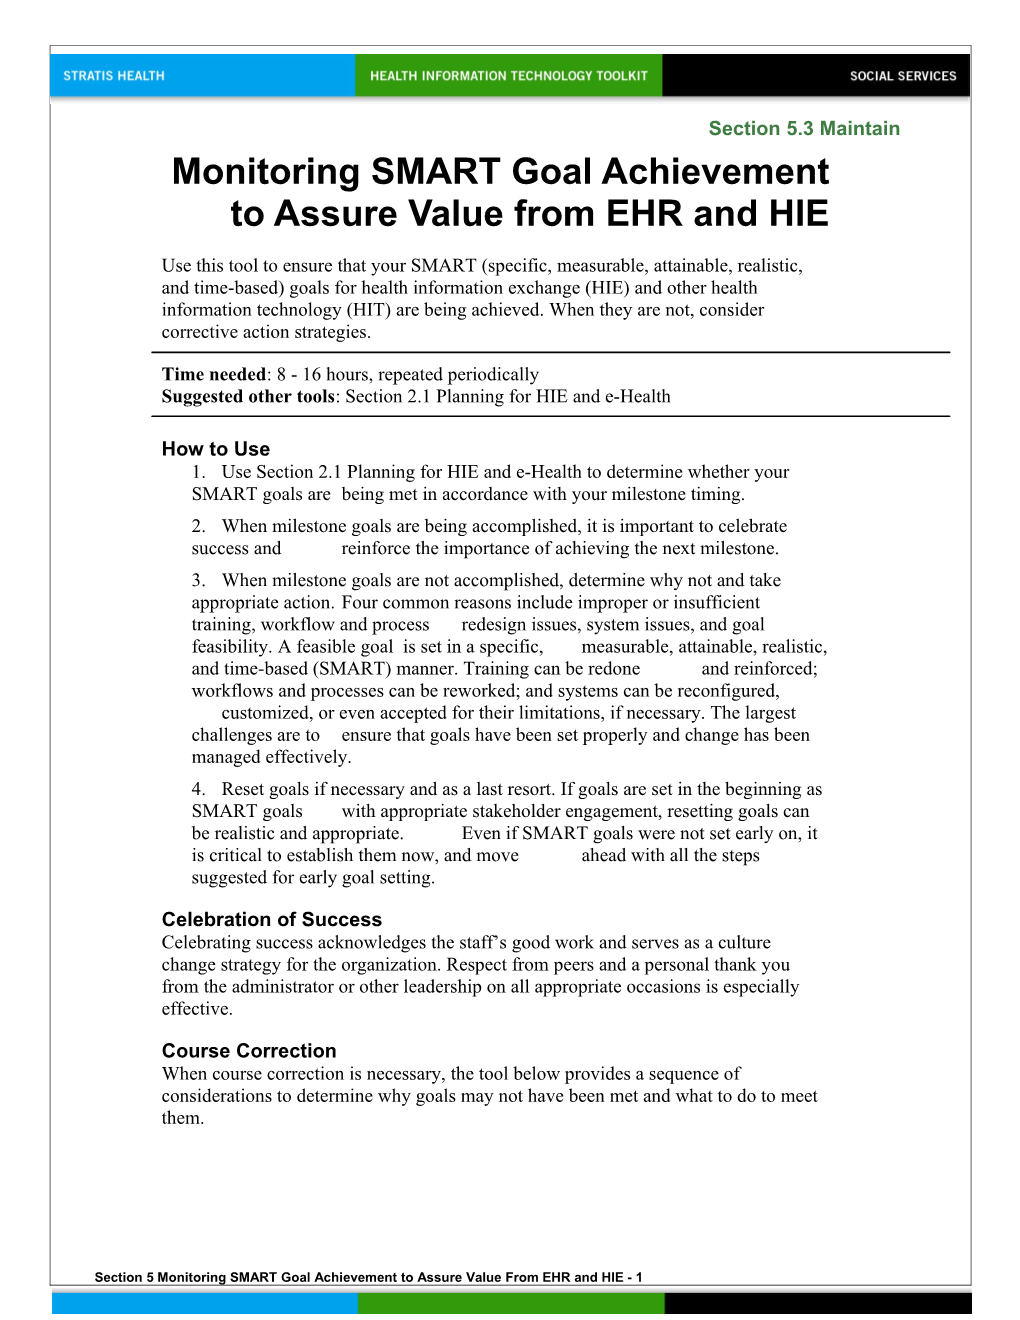 5 Monitoring SMART Goal Achievement to Assure Value from EHR and HIE